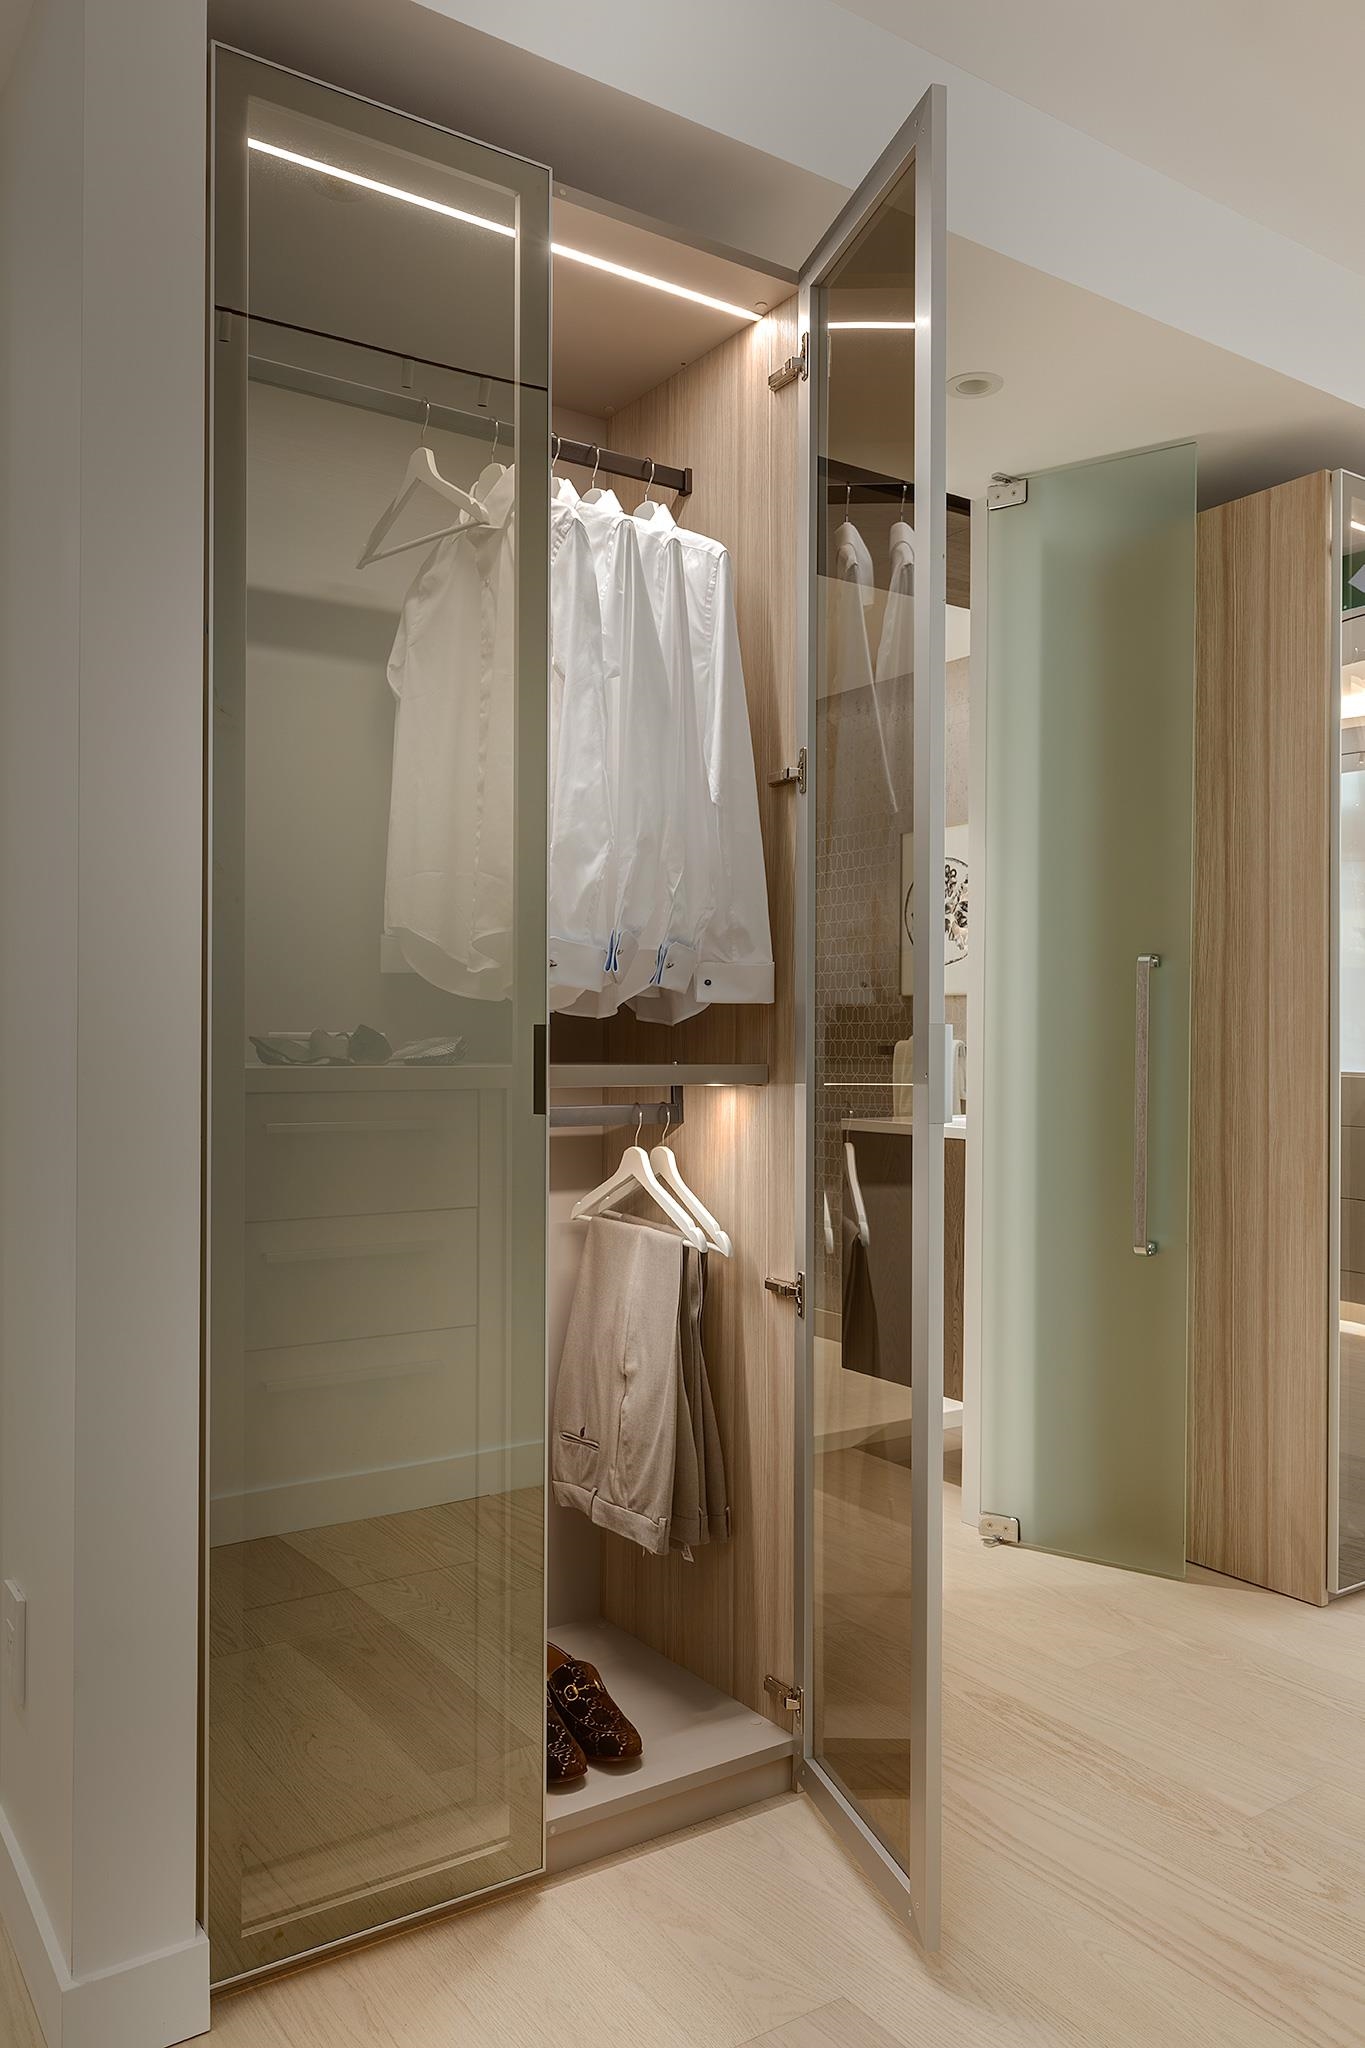 Sample of Primary Bedroom glass door closets with built-in shelving and drawer system.